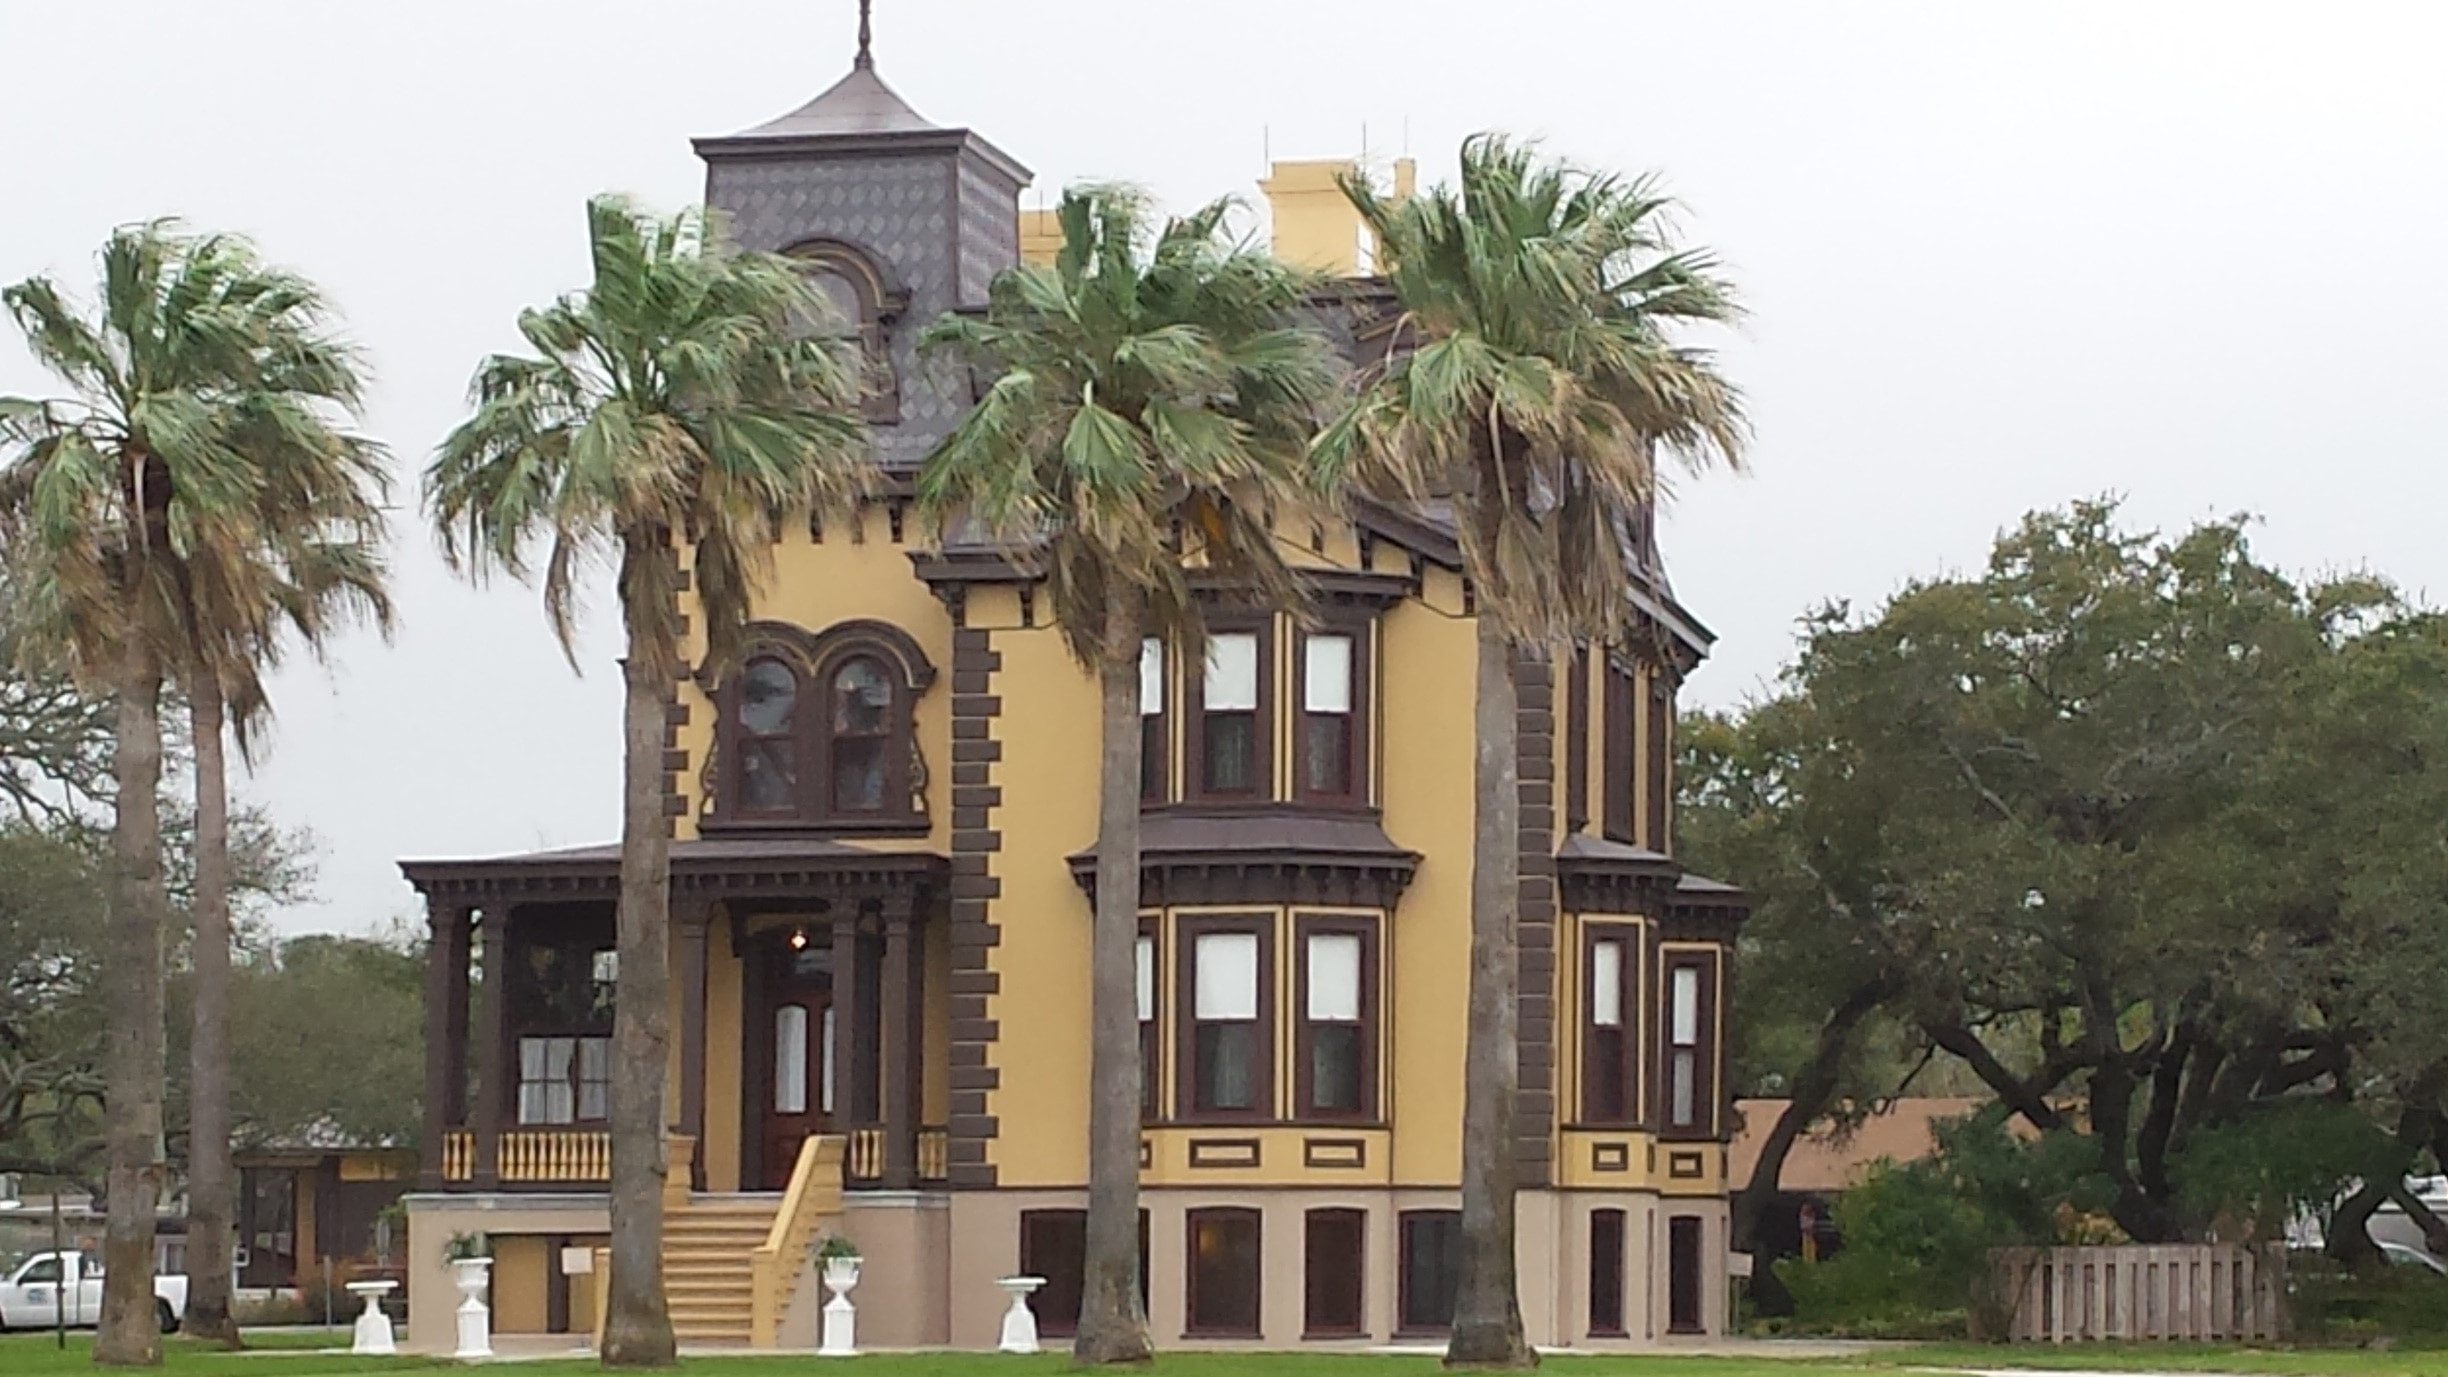 Newly renovated,  Fulton Mansion is rich with area history.  #BeachBound 